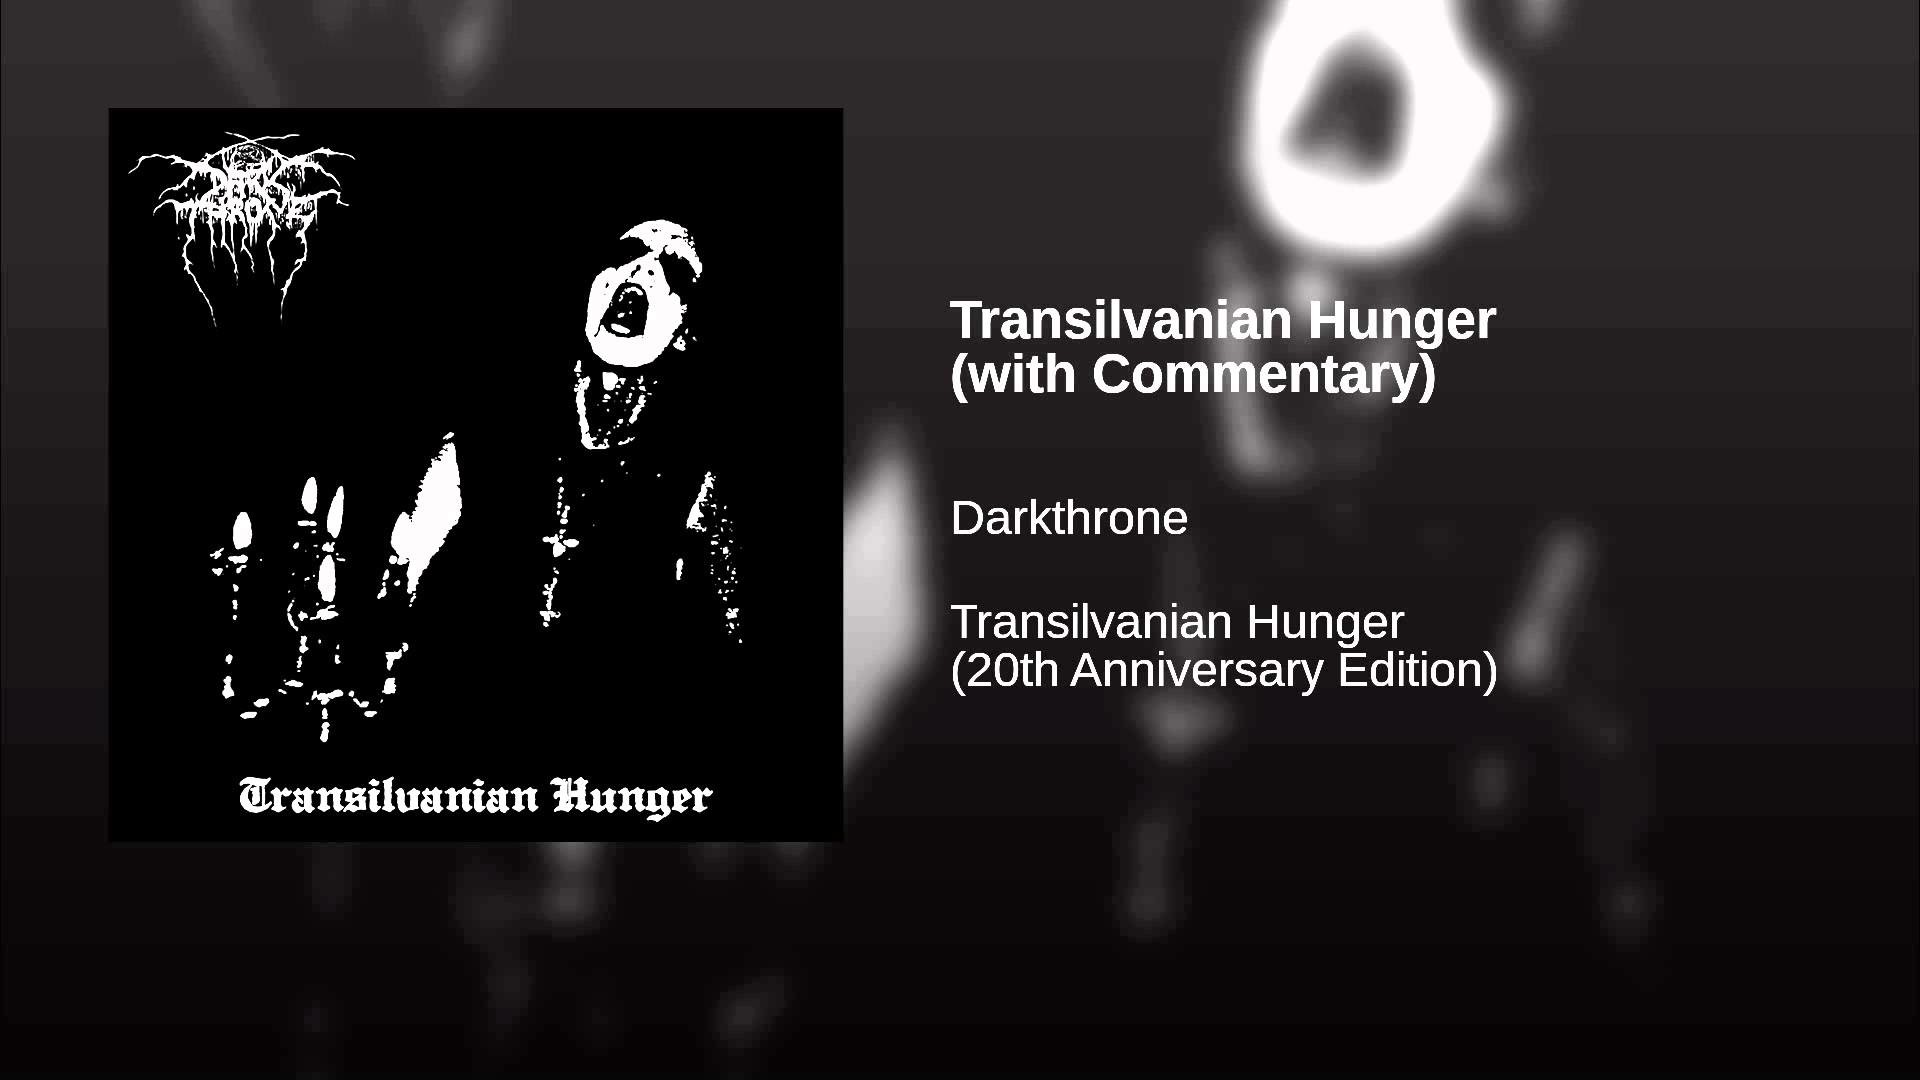 1920x1080 Transilvanian Hunger (with Commentary). Darkthrone - Topic